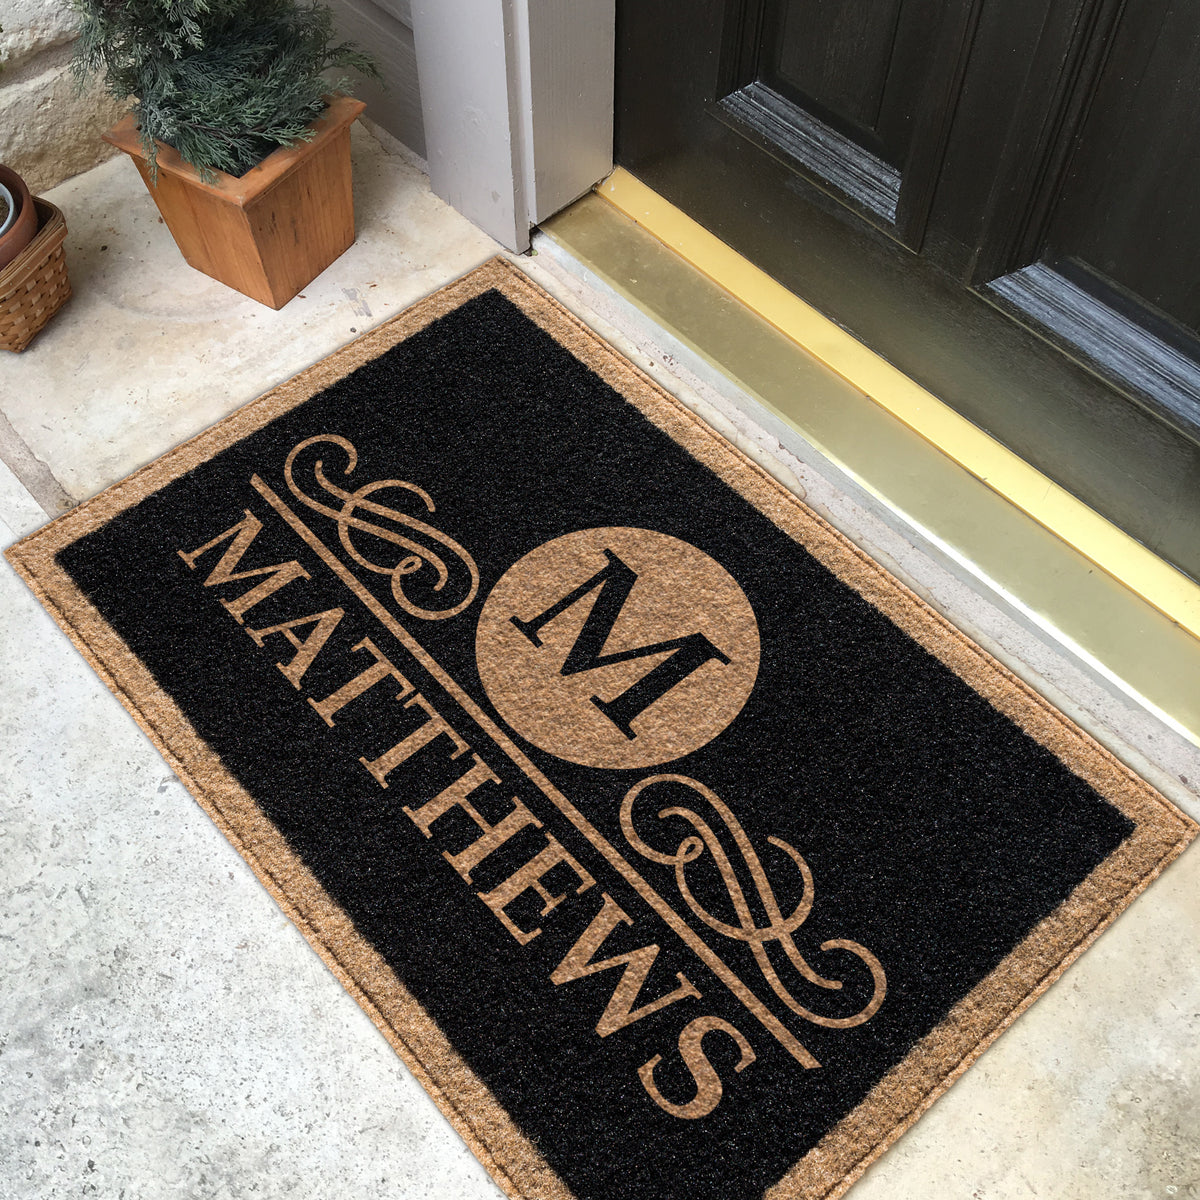 Infinity Custom Mats™ All-Weather Personalized Door Mat -.STYLE: MATTHEWS COLOR:BLACK - rugsthatfit.com